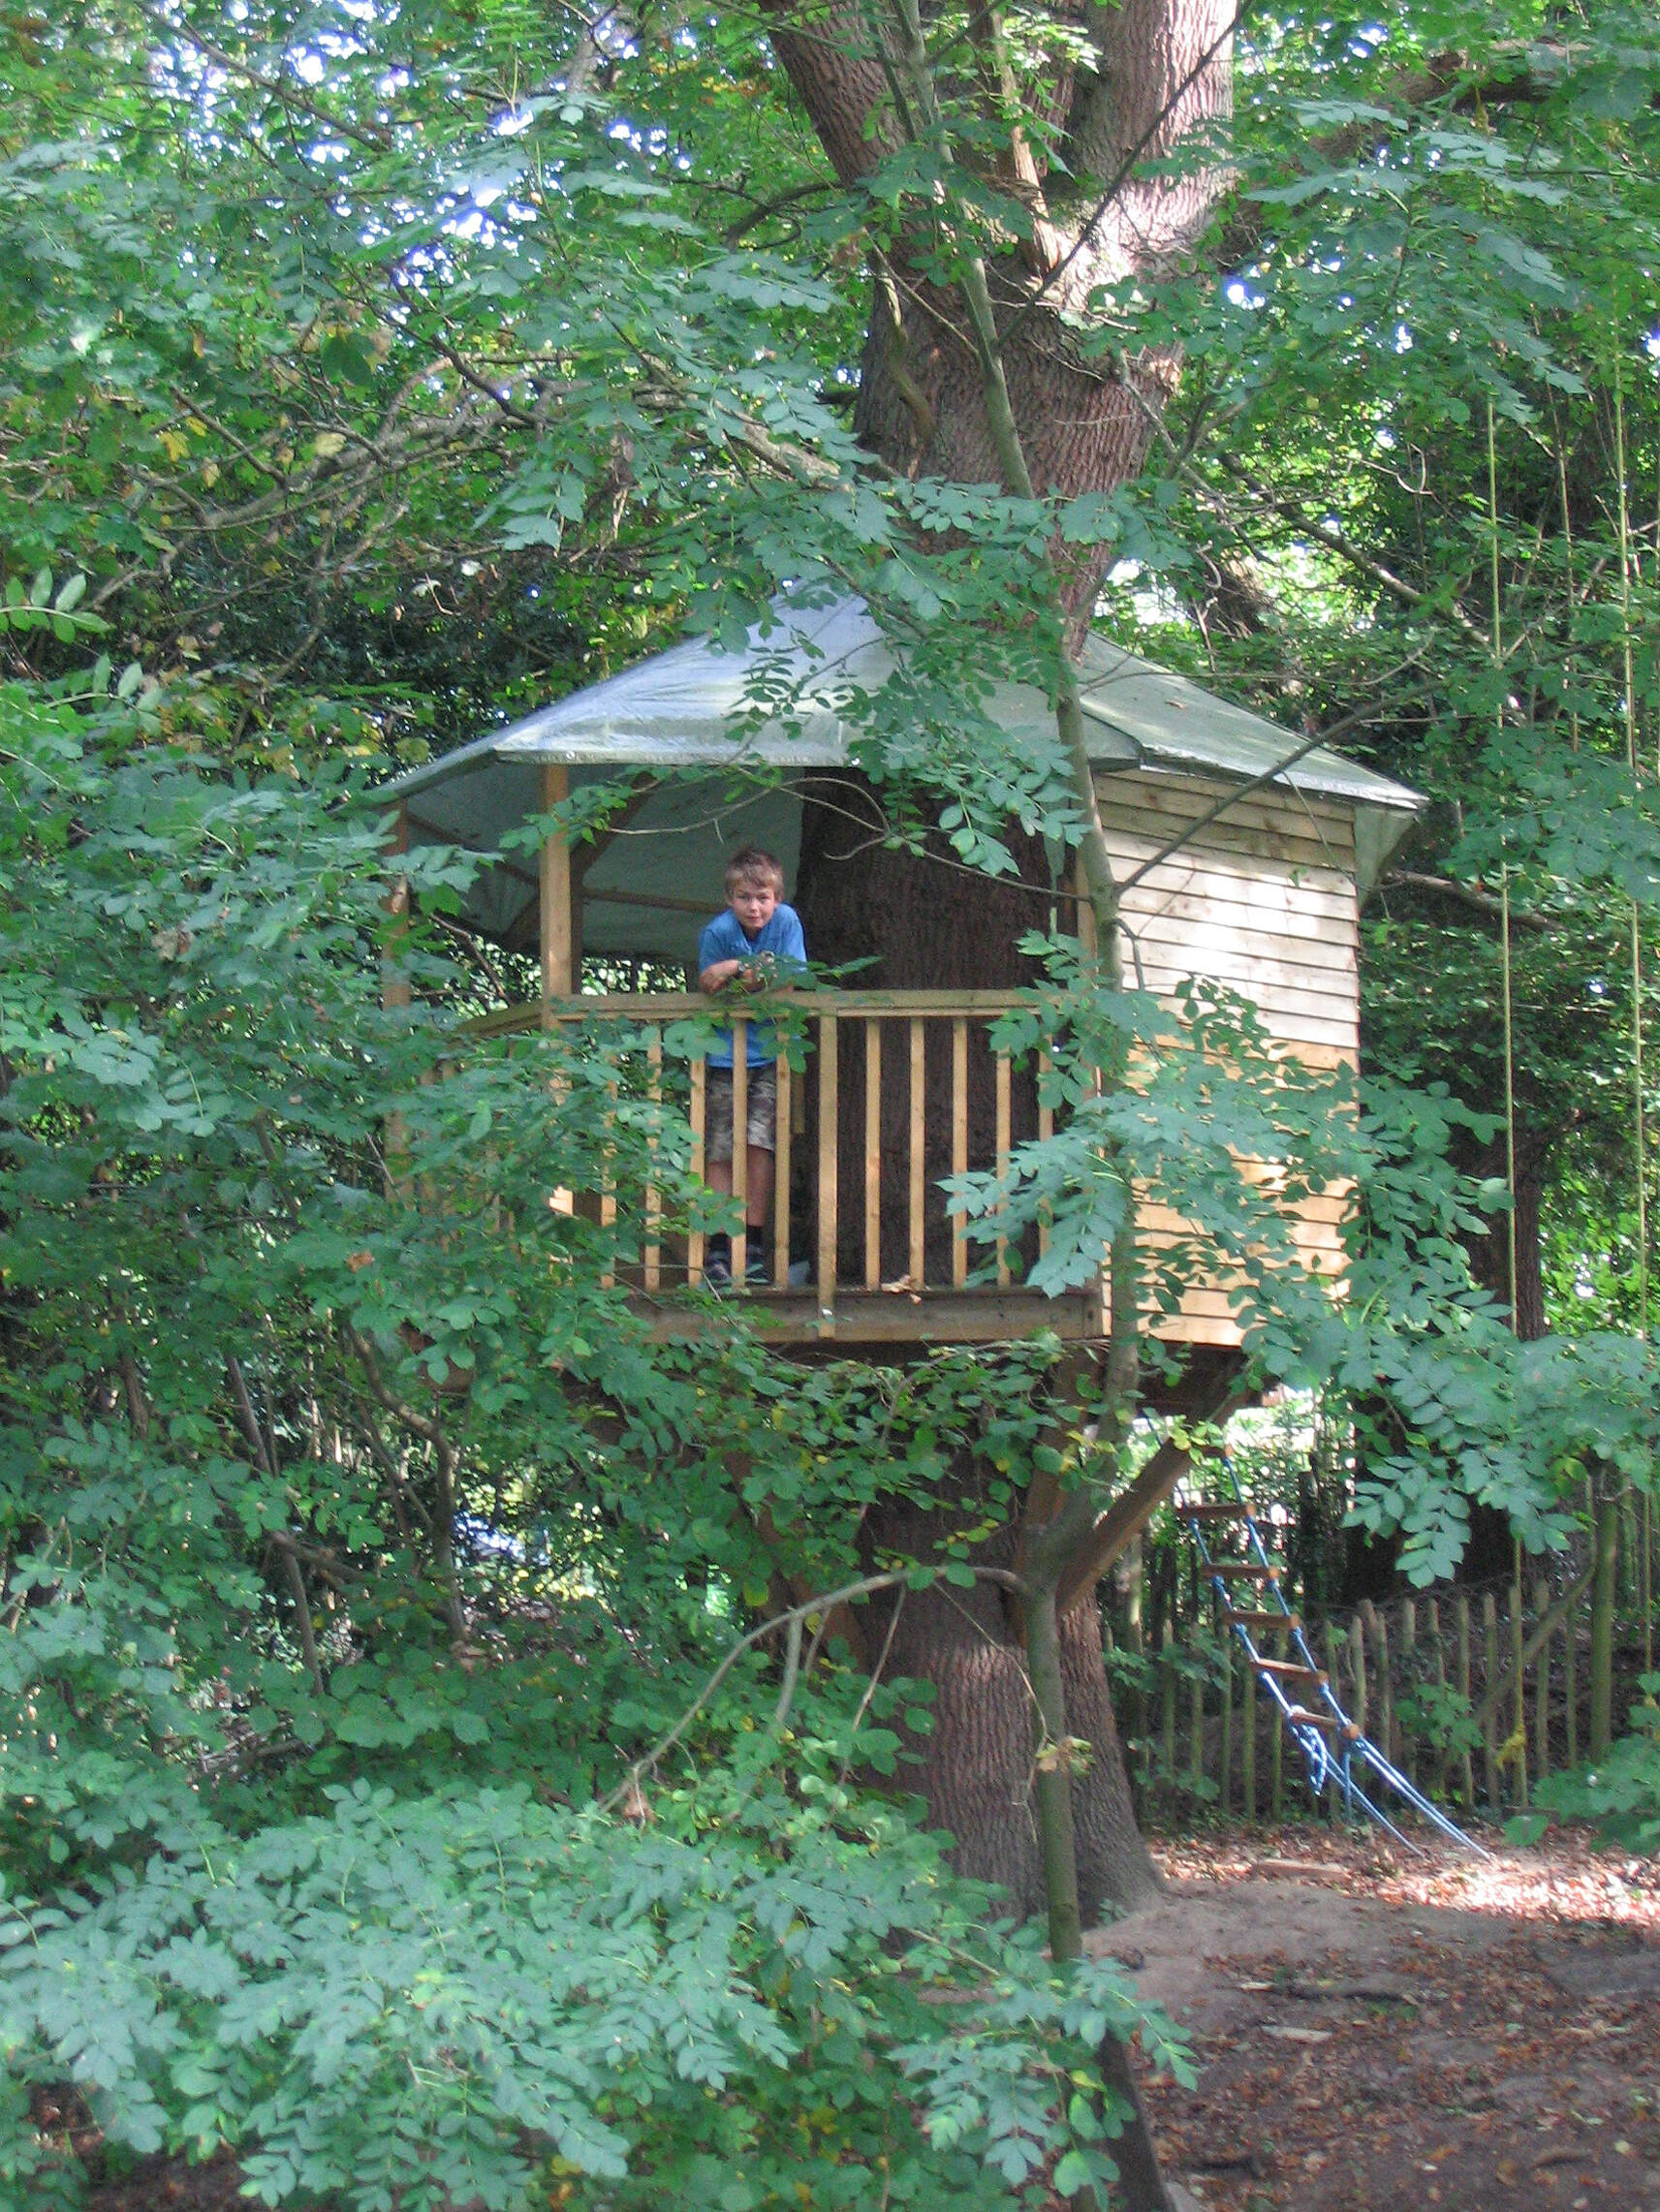 Construction of a children's tree house